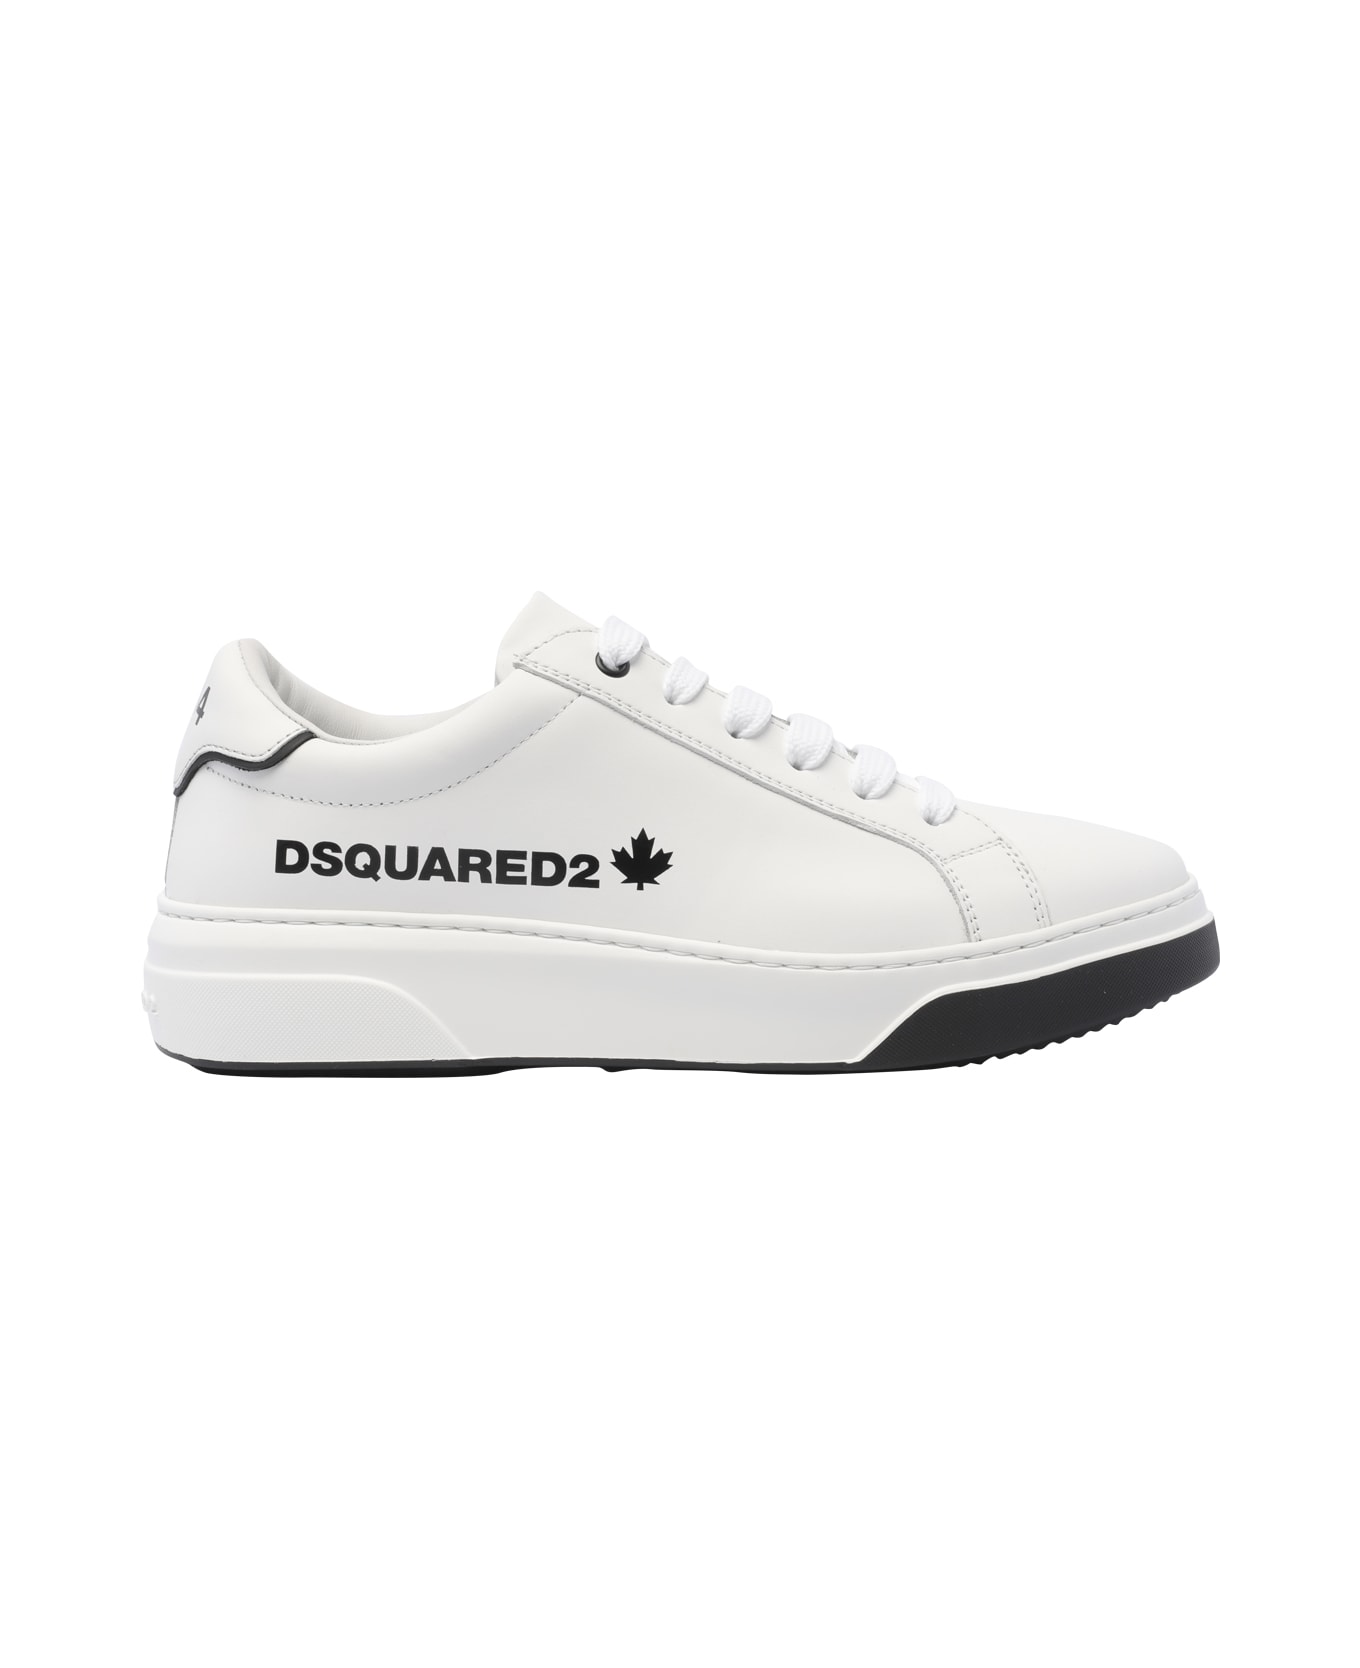 Dsquared2 Bumper Leather Sneakers - Bianco